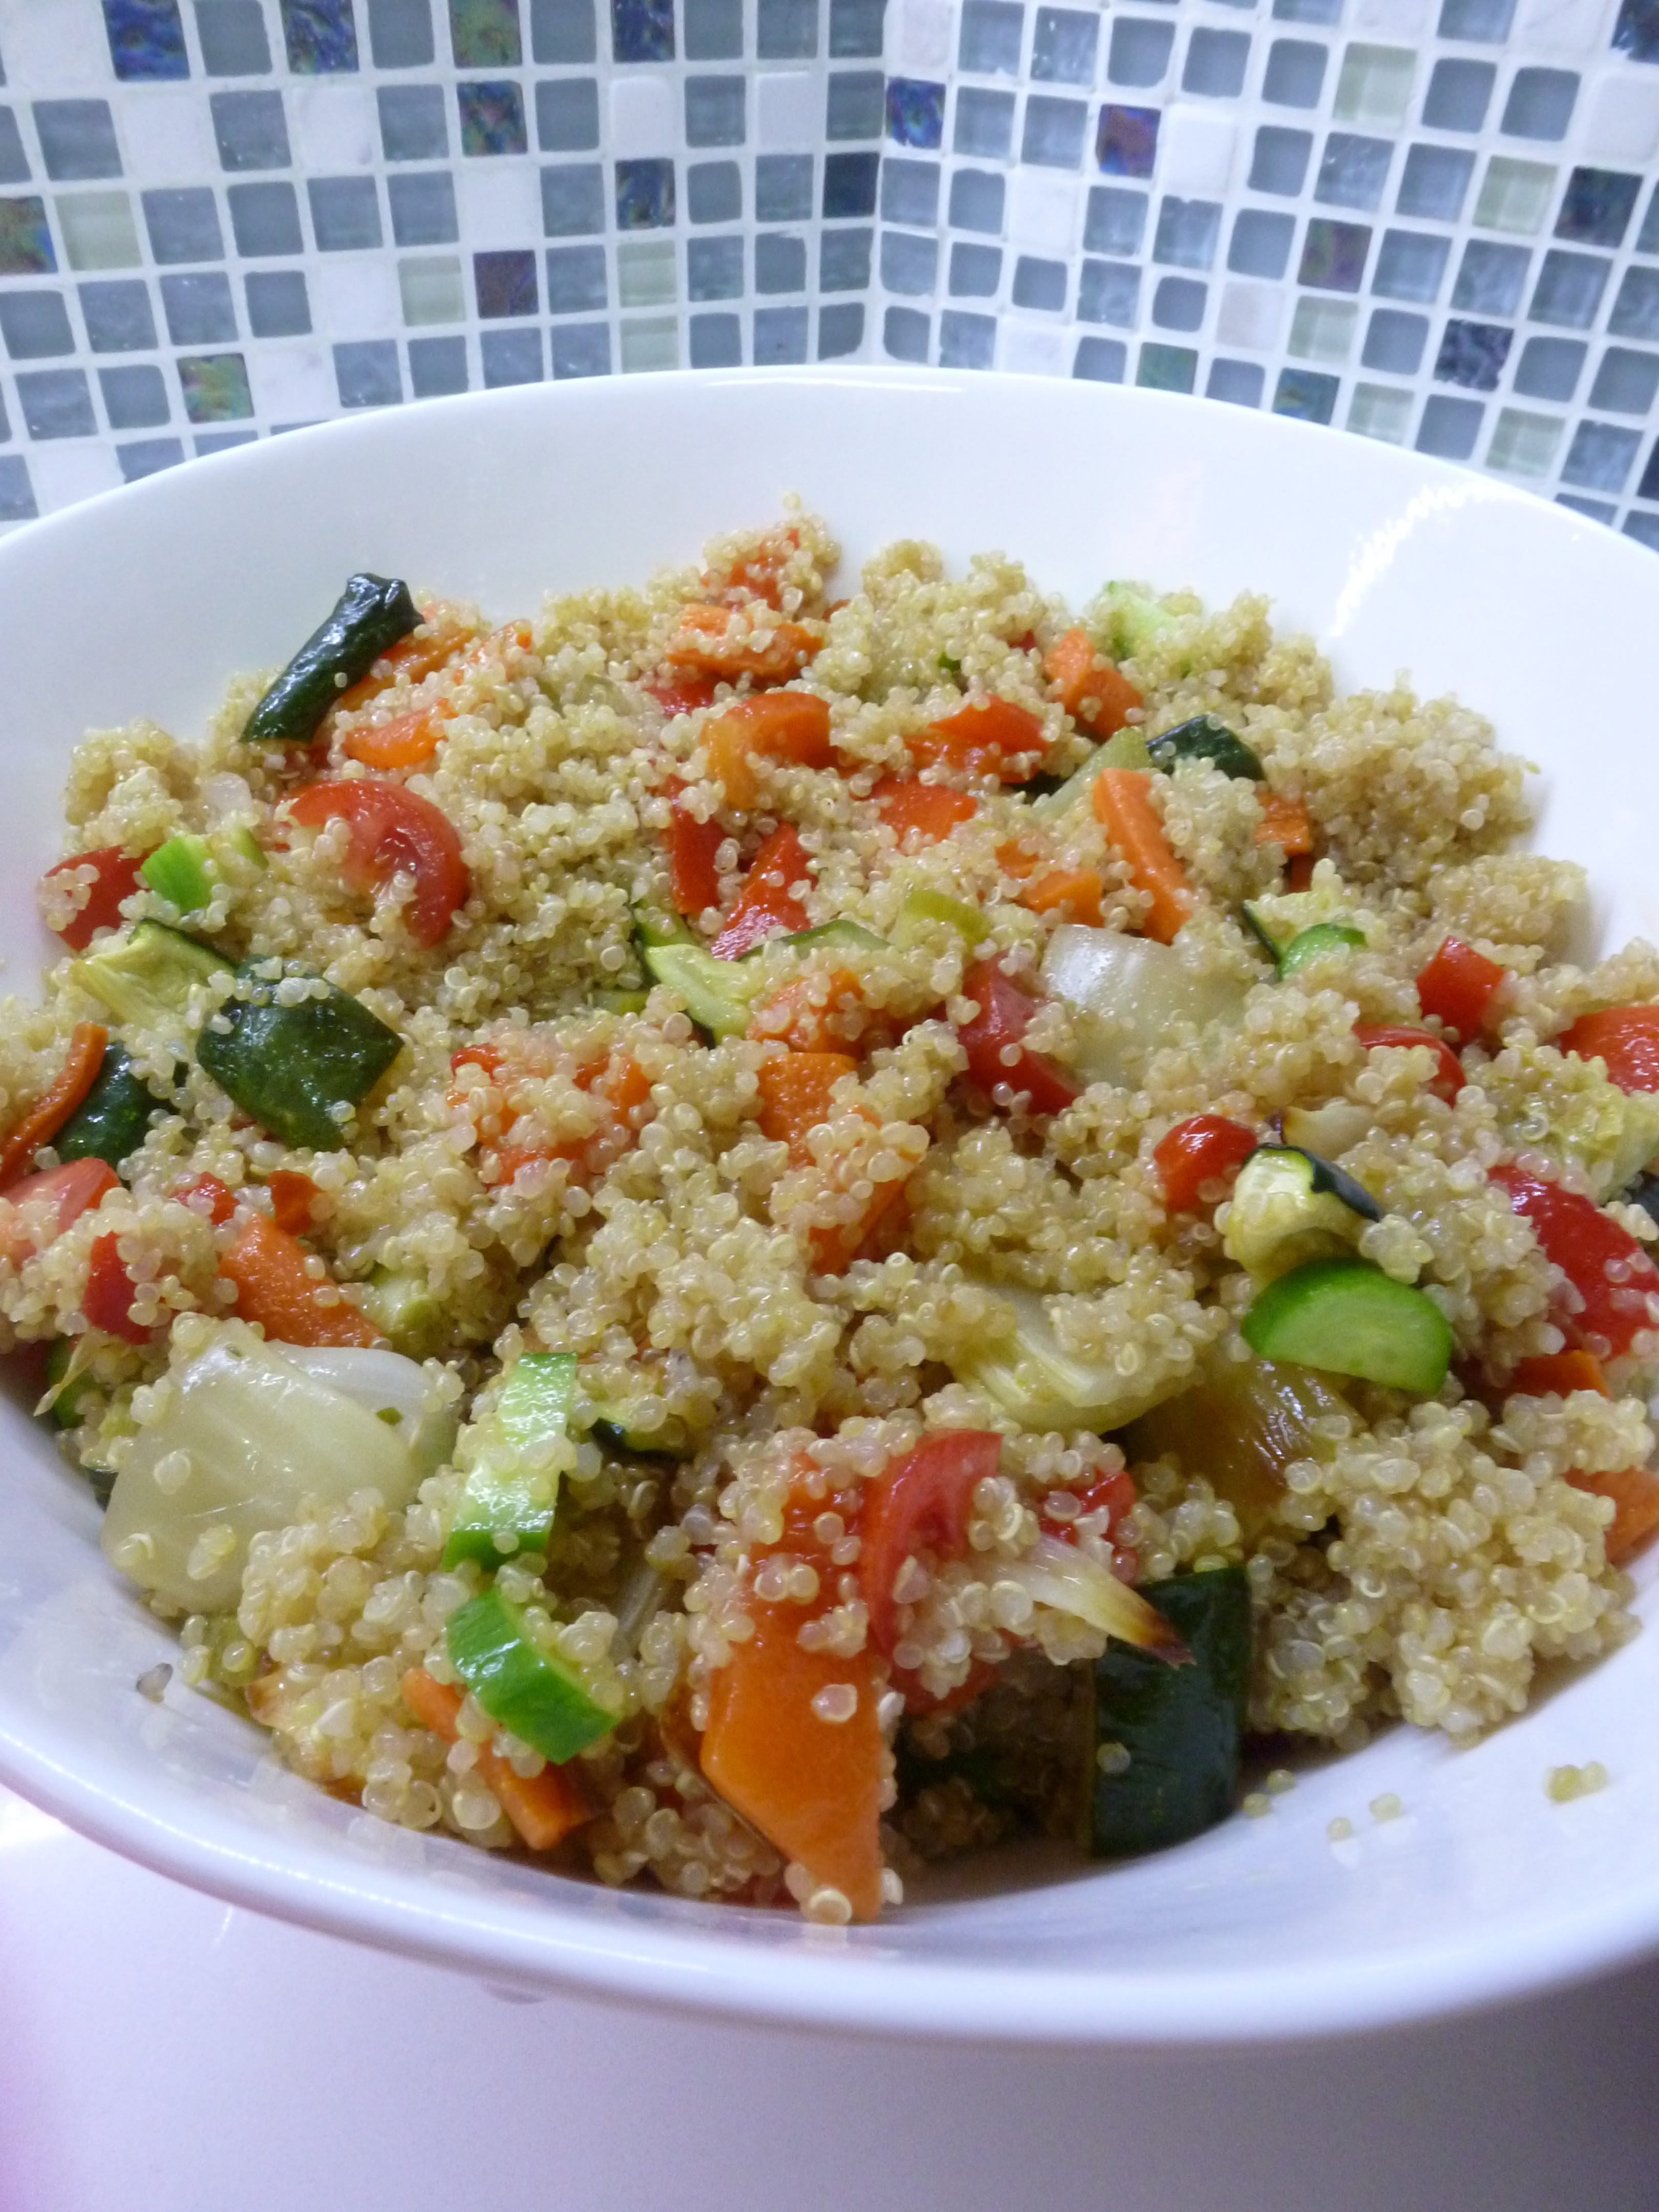 Quinoa Kosher For Passover
 Roasted Ve able and Quinoa Salad with Citrus Dressing